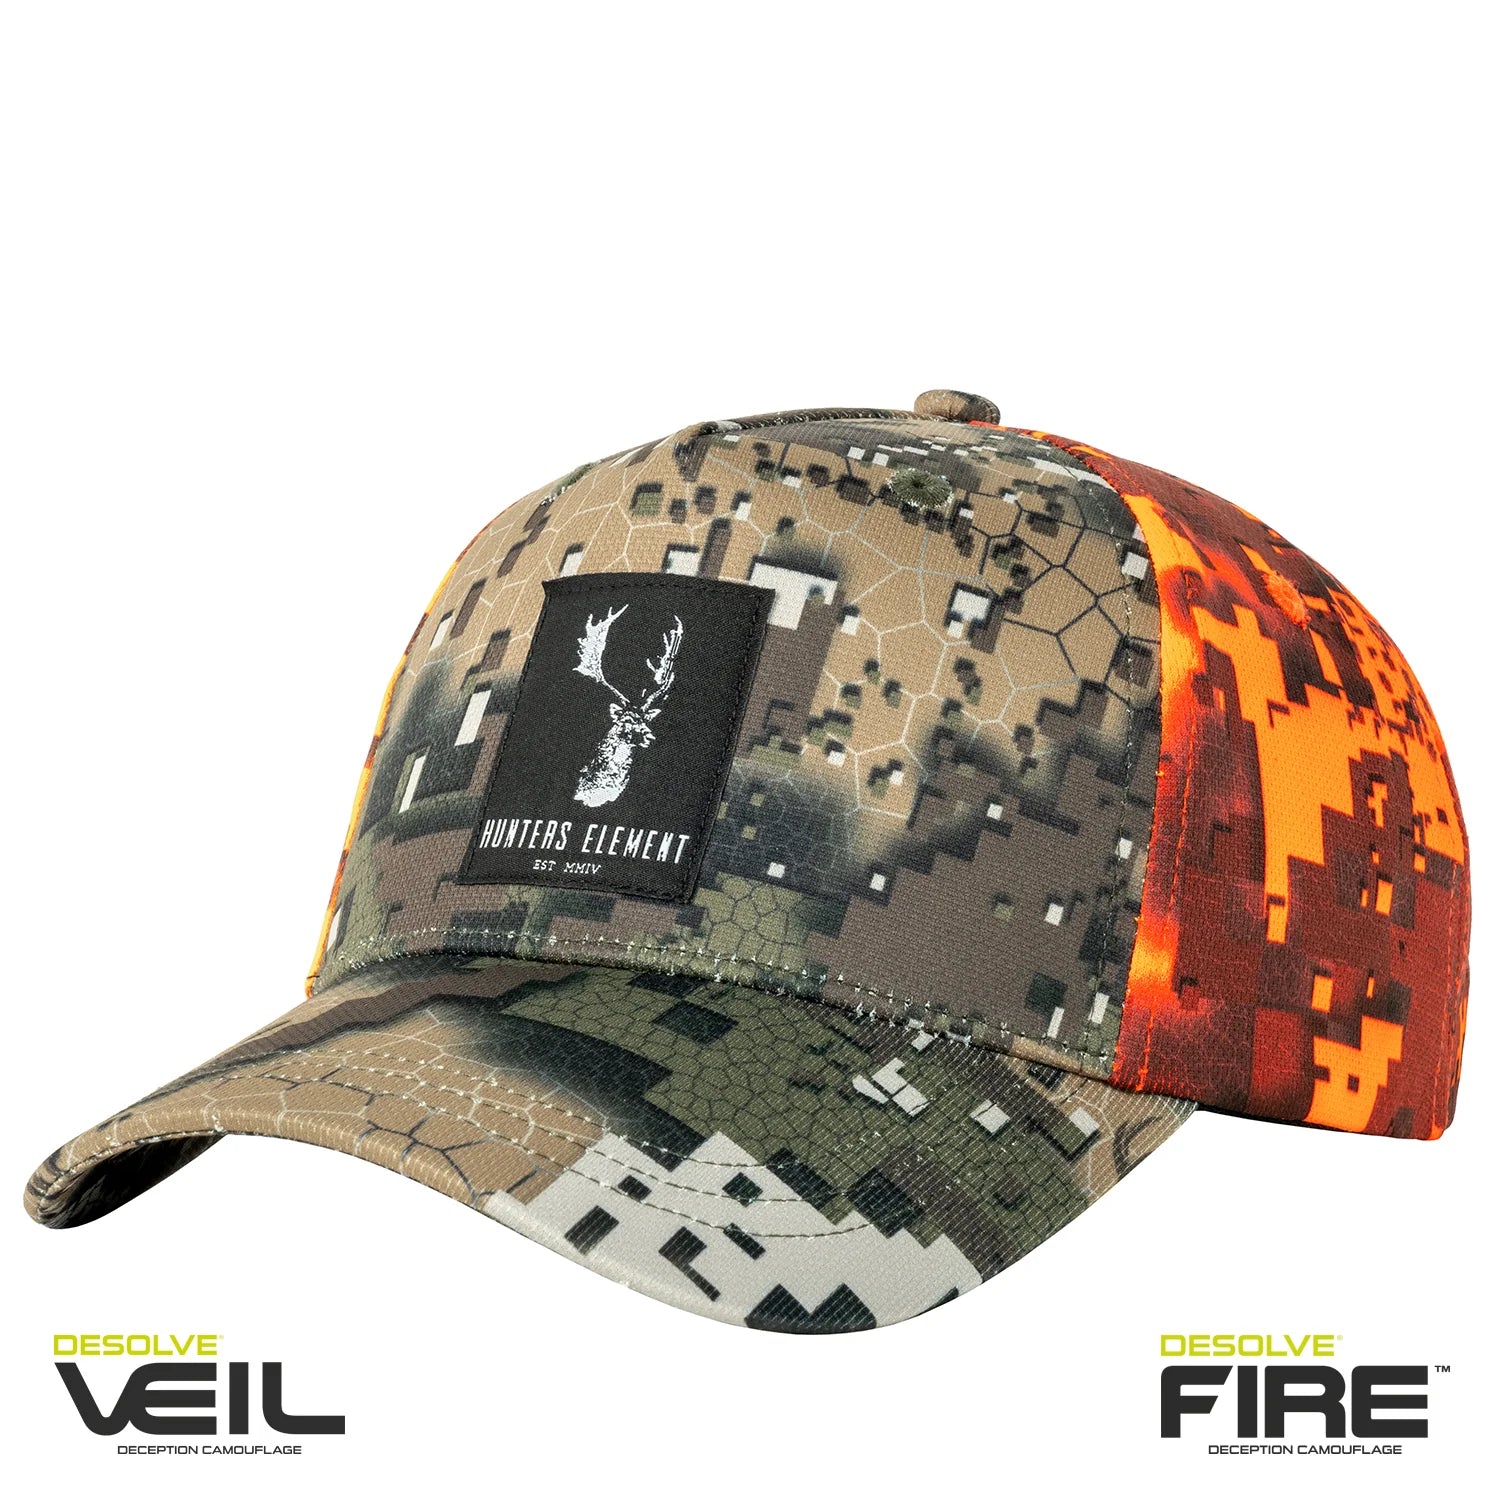 Hunters Element Croaker Cap - DESOLVE FIRE/VEIL - Mansfield Hunting & Fishing - Products to prepare for Corona Virus